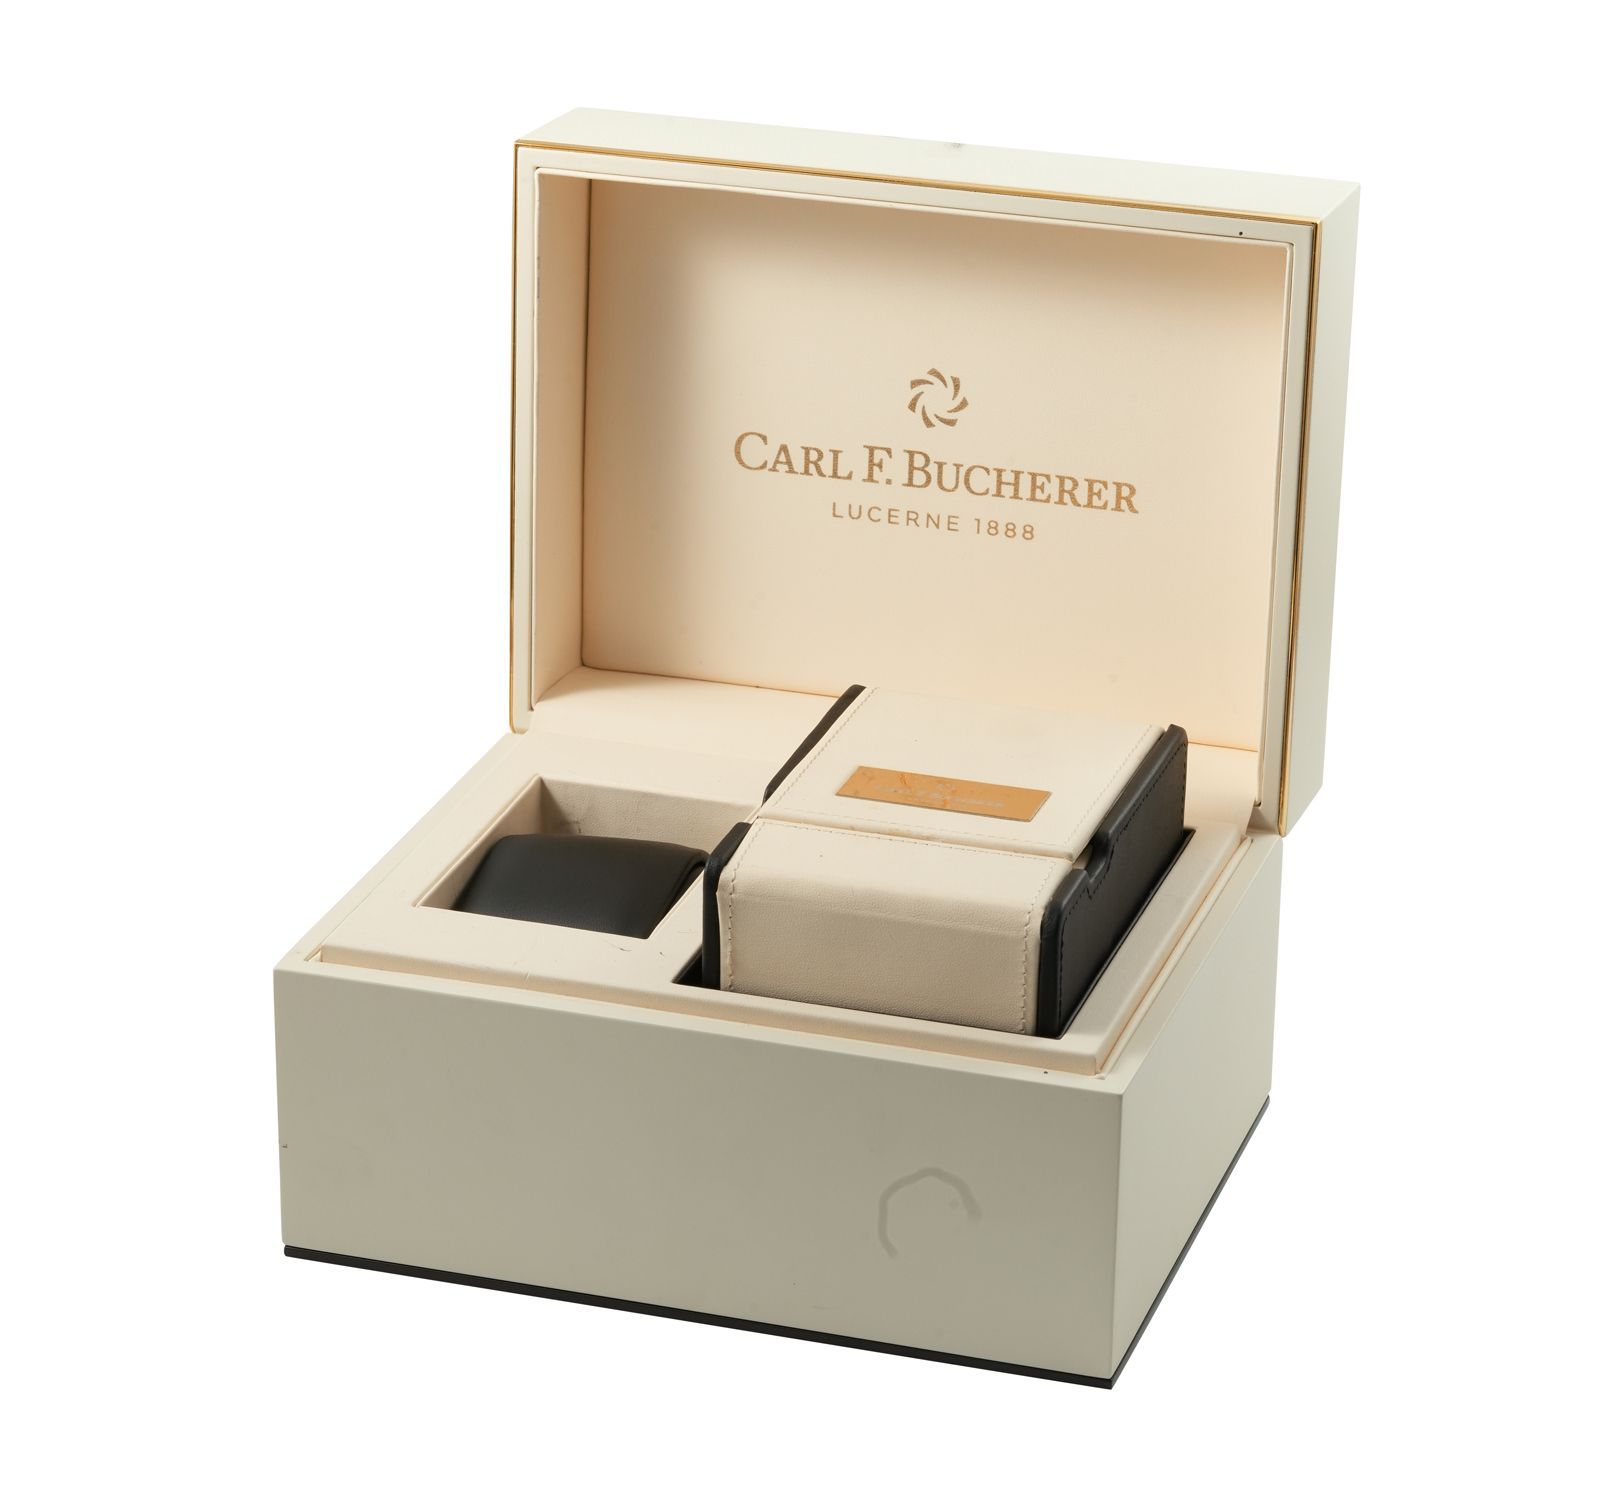 Carl F. Bucherer Heritage Features